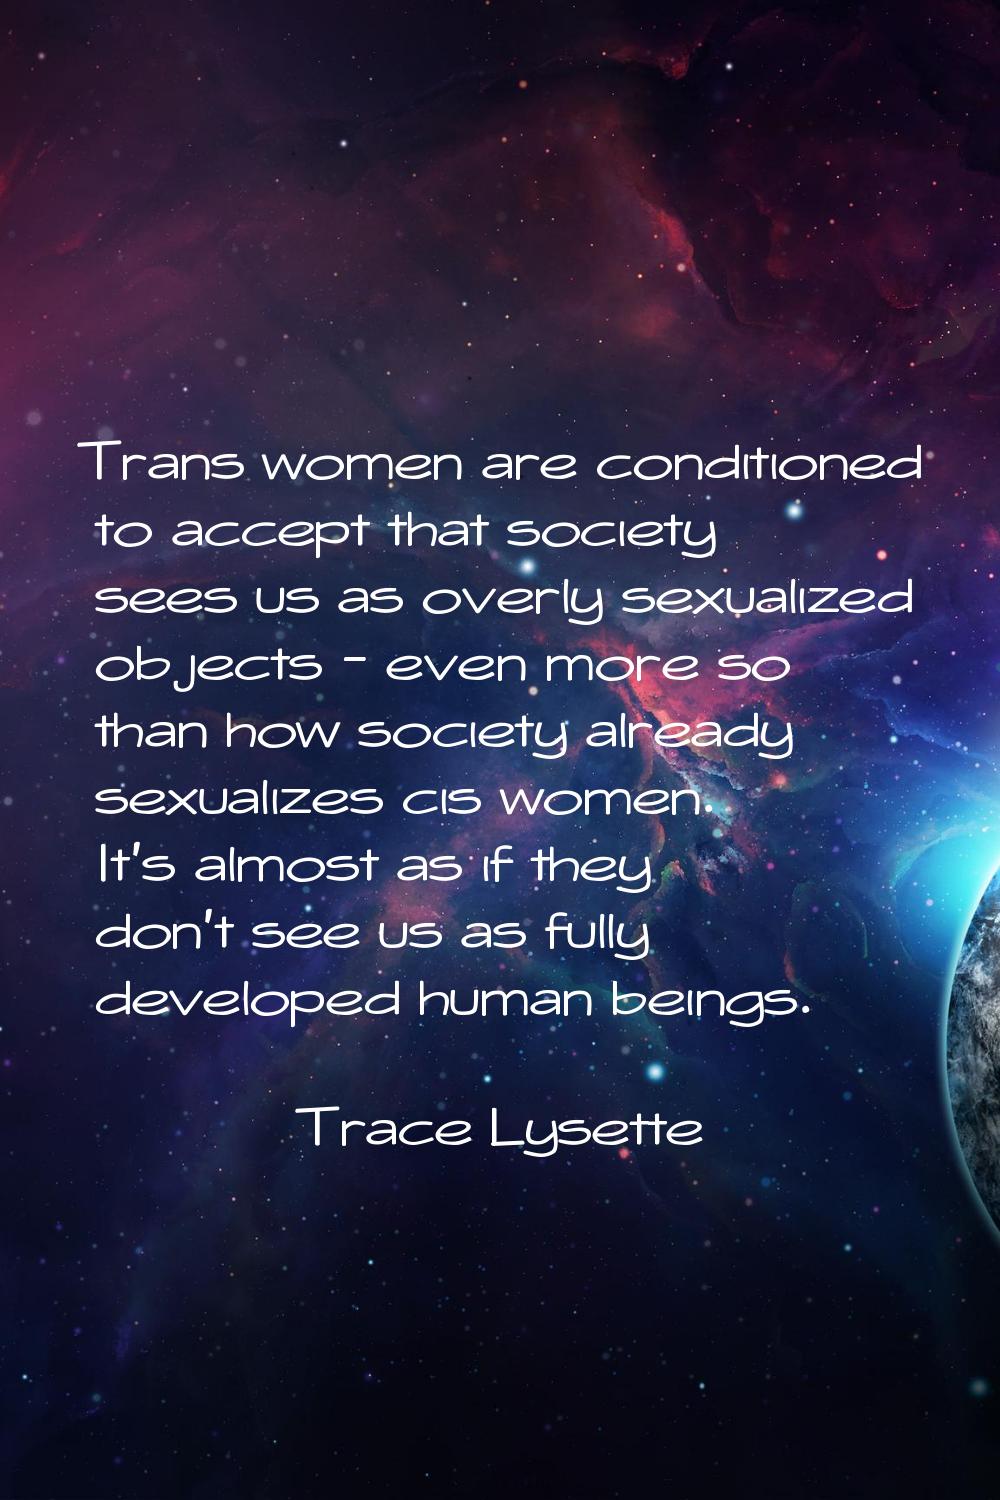 Trans women are conditioned to accept that society sees us as overly sexualized objects - even more